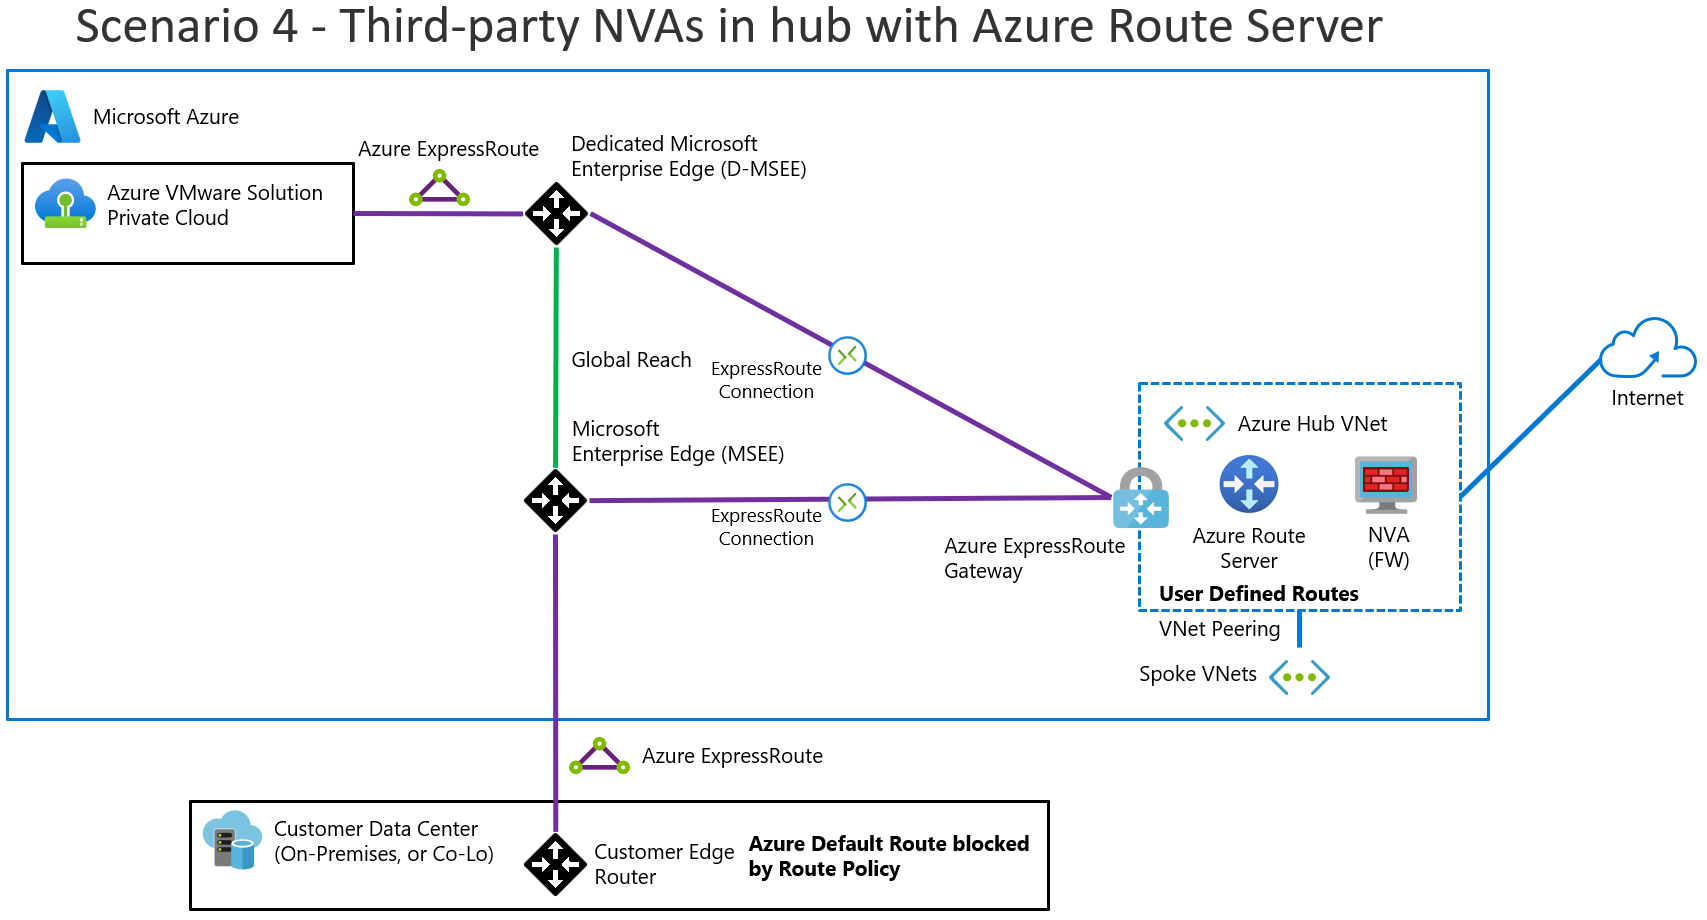 Diagram of overview of scenario 4 with a third-party N V A in the hub V Net inspecting traffic between Azure VMware Solution and the internet and between Azure VMware Solution and Azure Virtual Network.